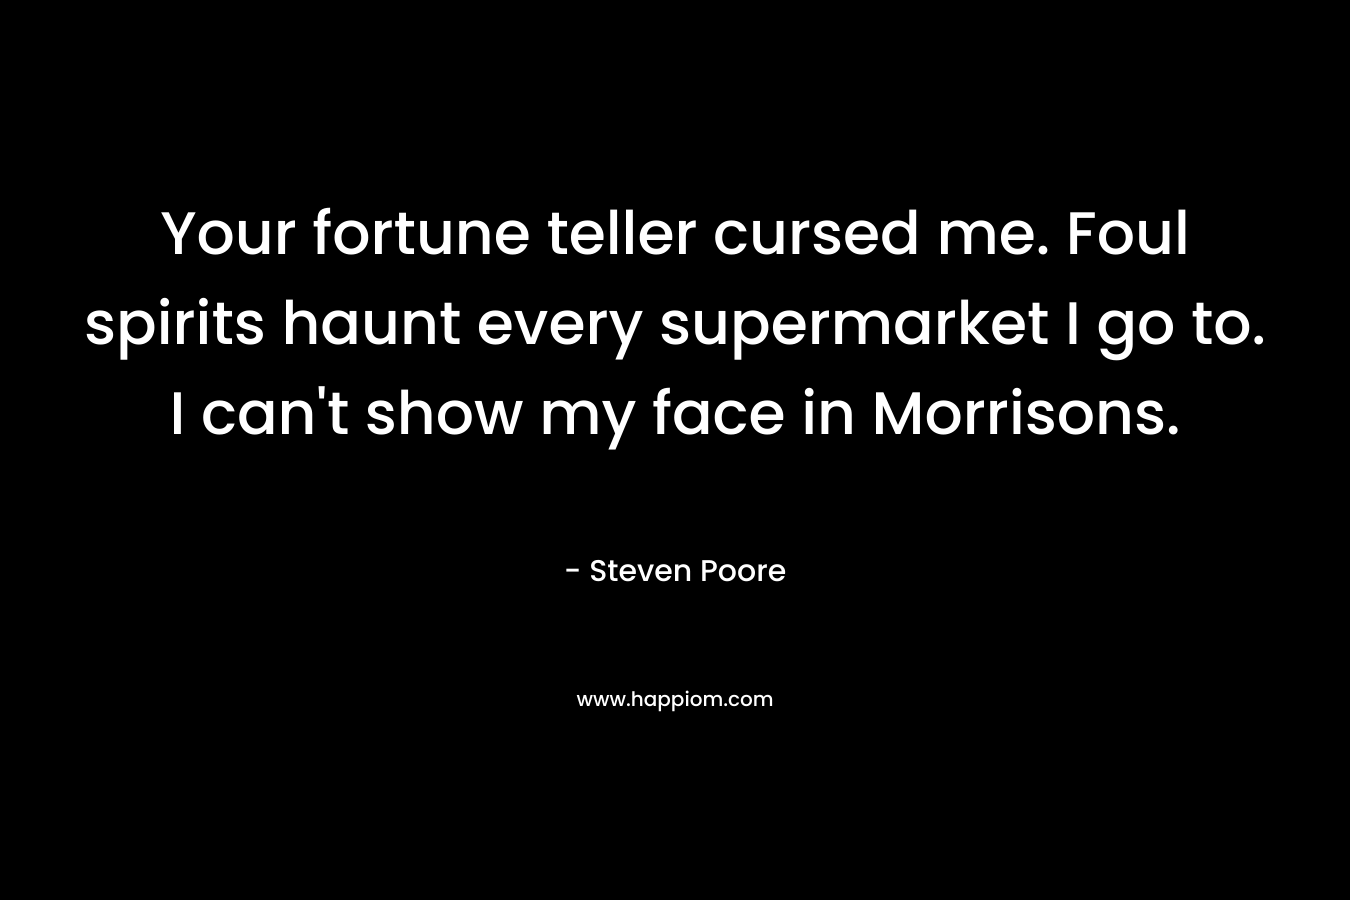 Your fortune teller cursed me. Foul spirits haunt every supermarket I go to. I can't show my face in Morrisons.